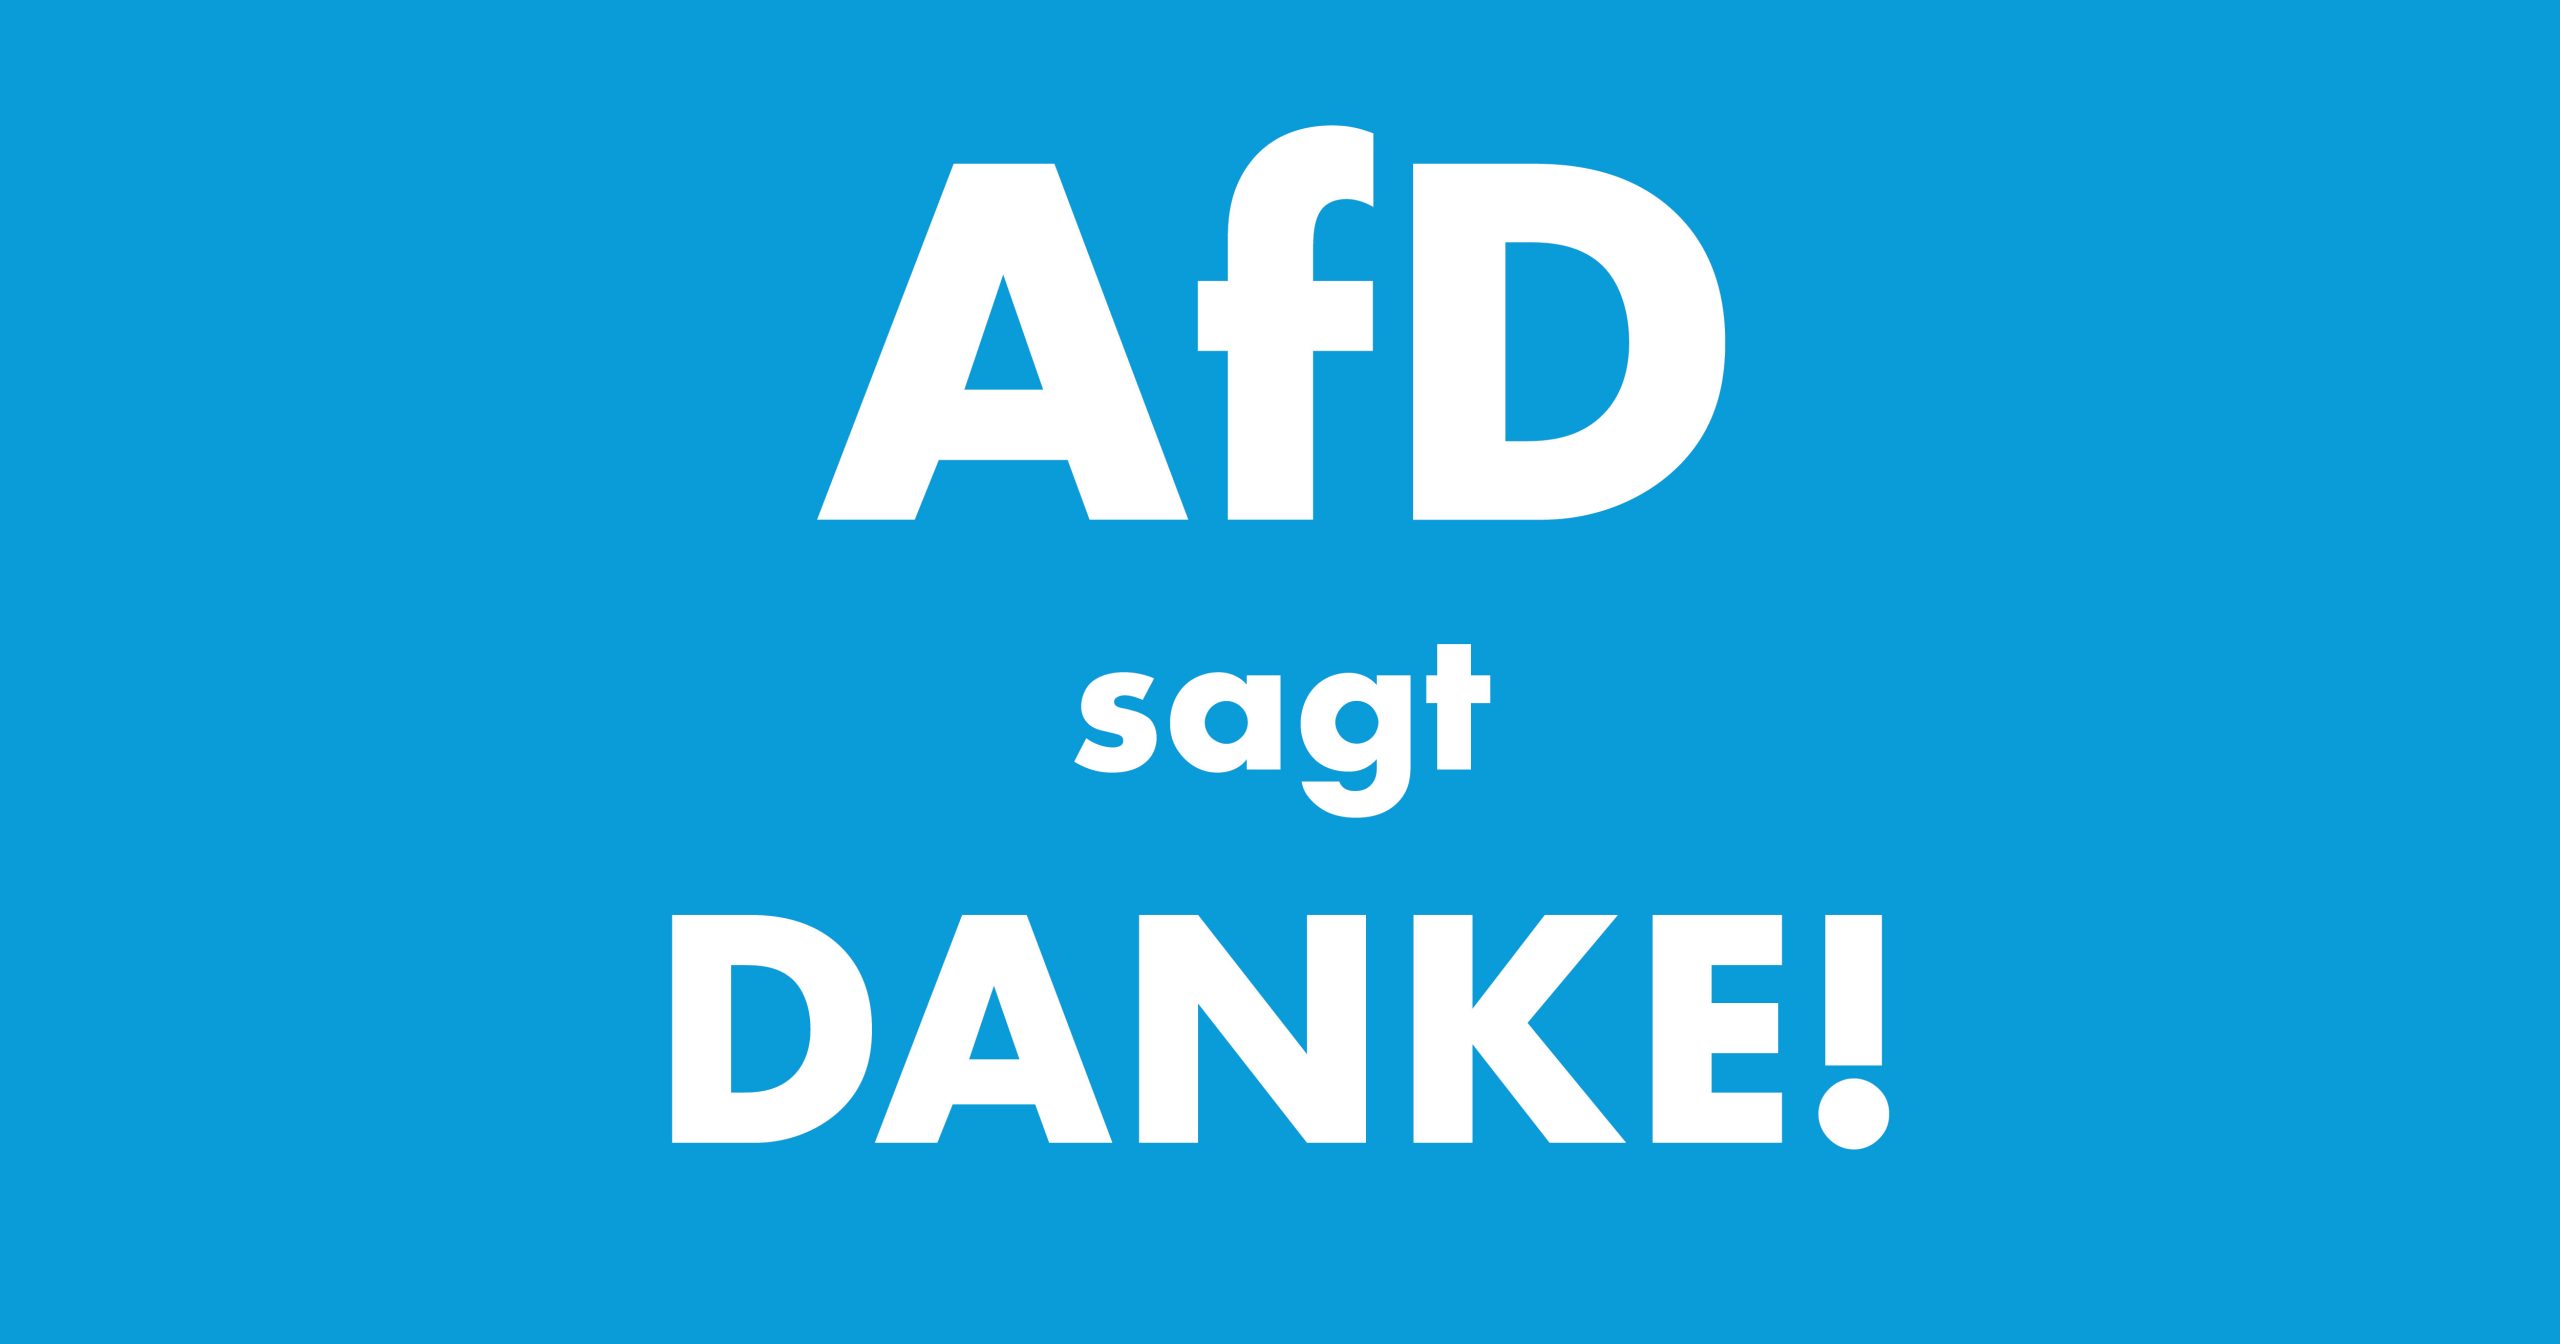 You are currently viewing AfD sagt Danke!